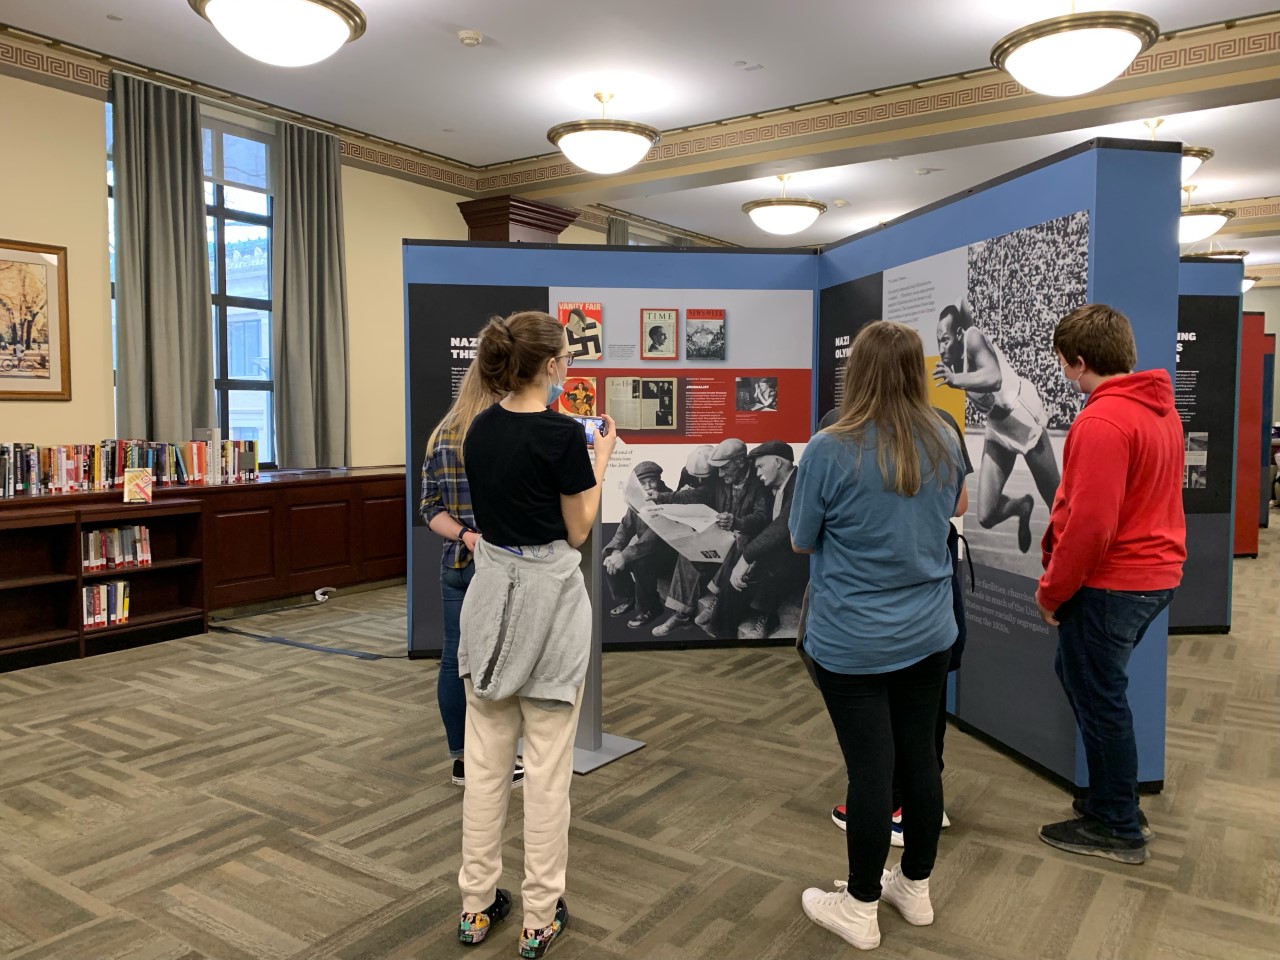 Photograph of a group of people looking at the Americans and the Holocaust exhibition panel inside of Penn State library.